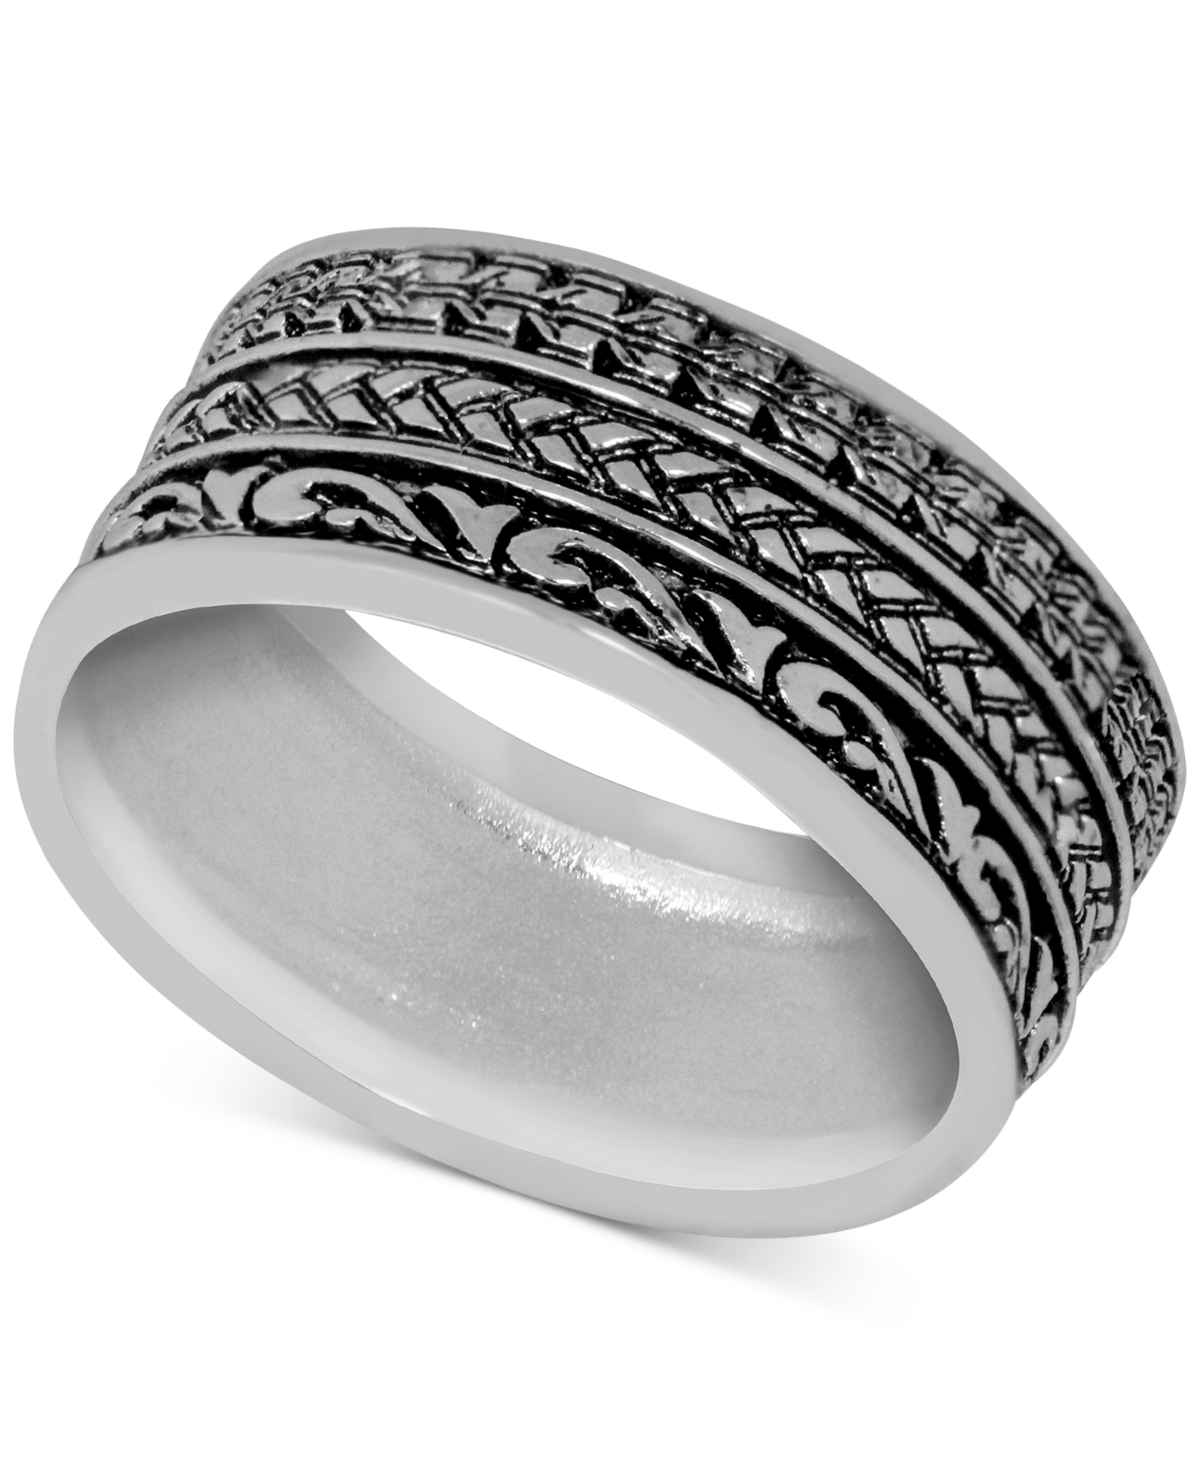 Patterned Band Ring in Silver-Plate - Silver